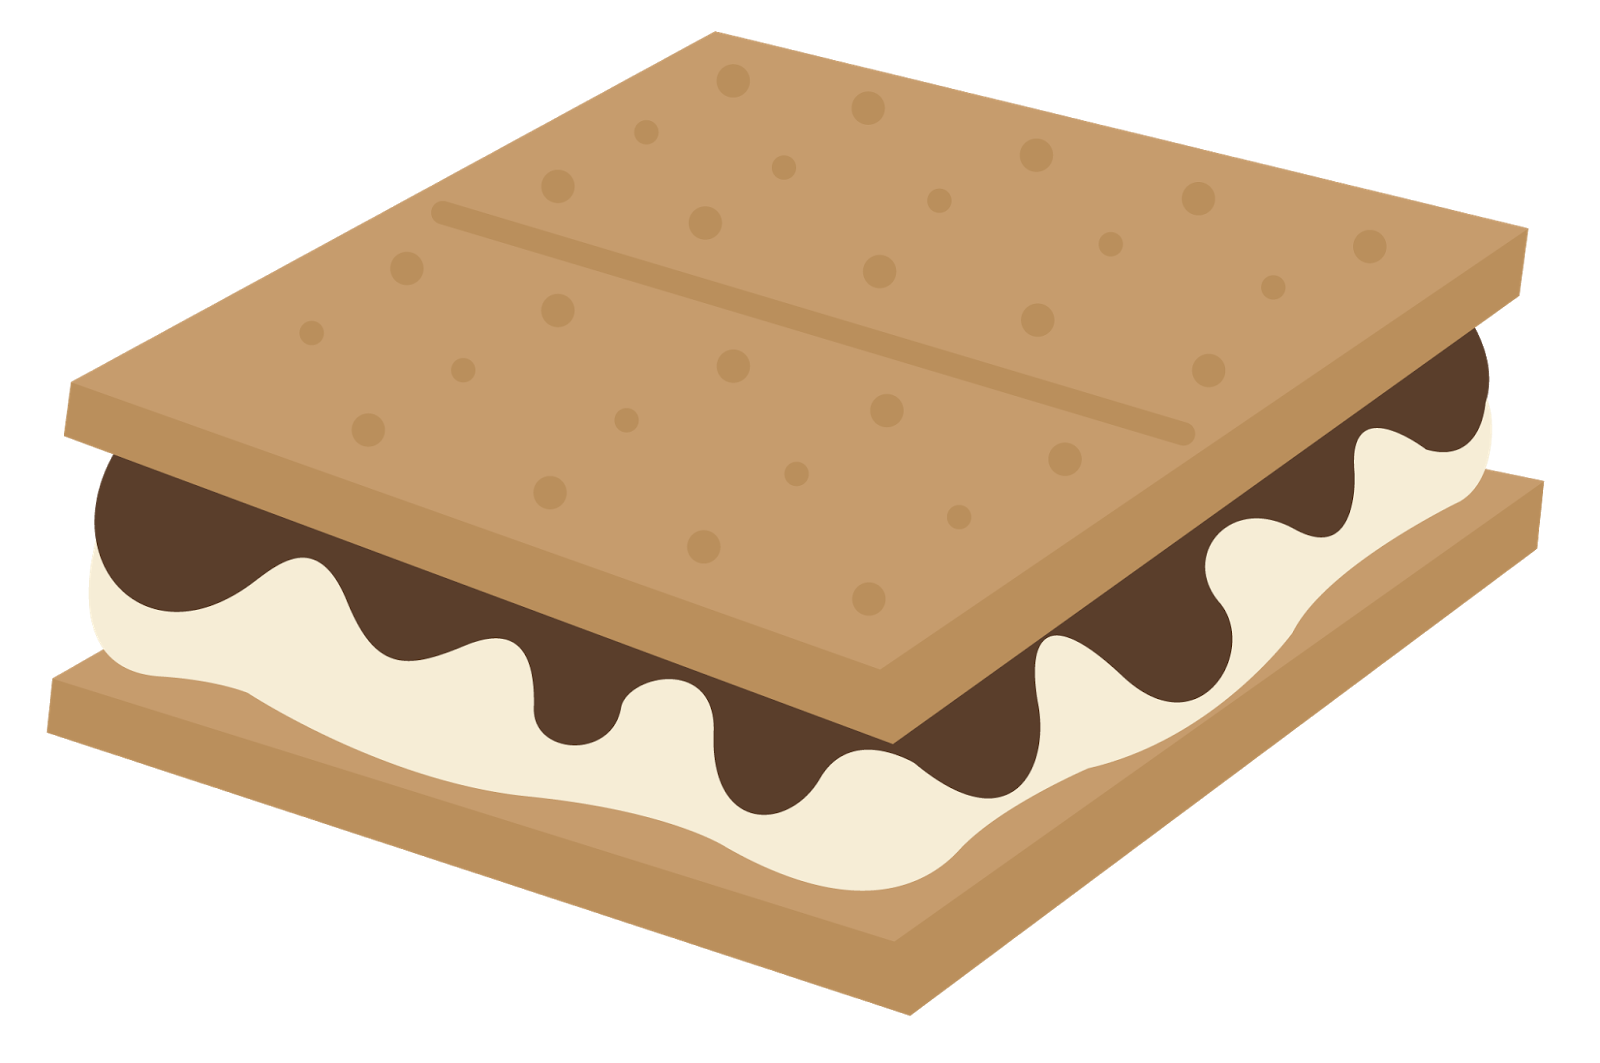 Smores clipart happy, Smores happy Transparent FREE for